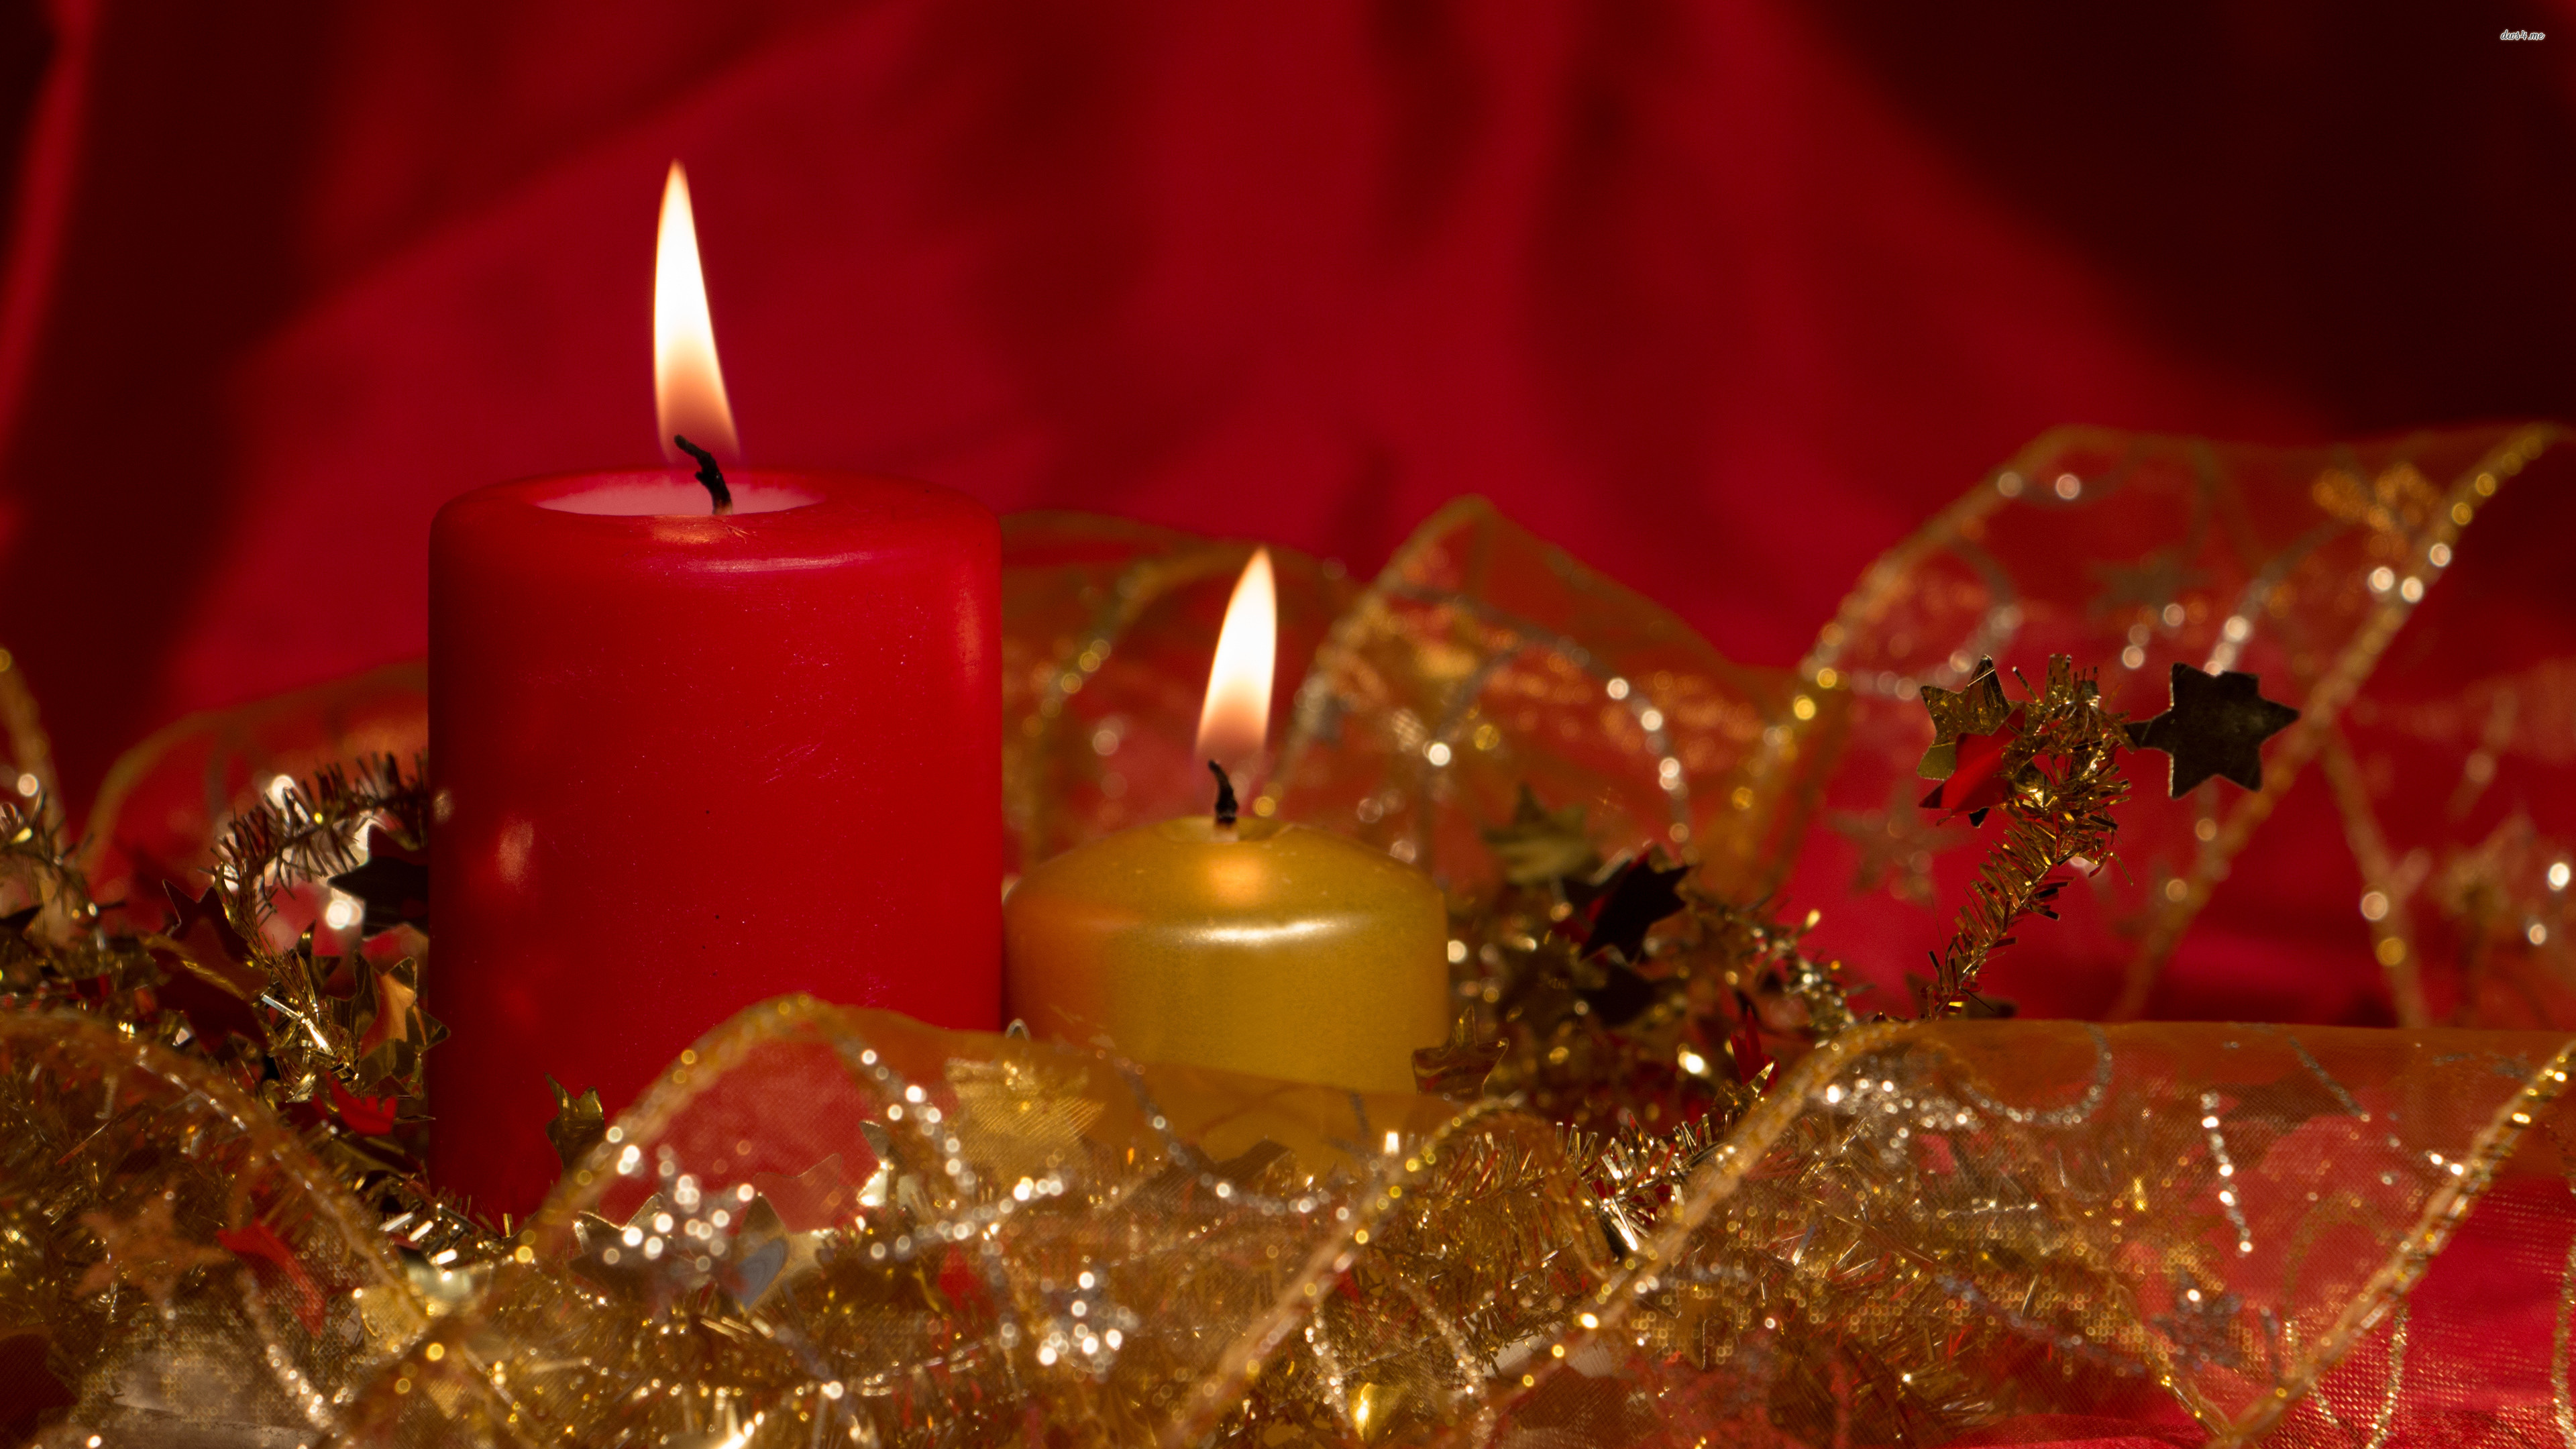 3840x2160 ... Red and golden Christmas candles wallpaper  ...